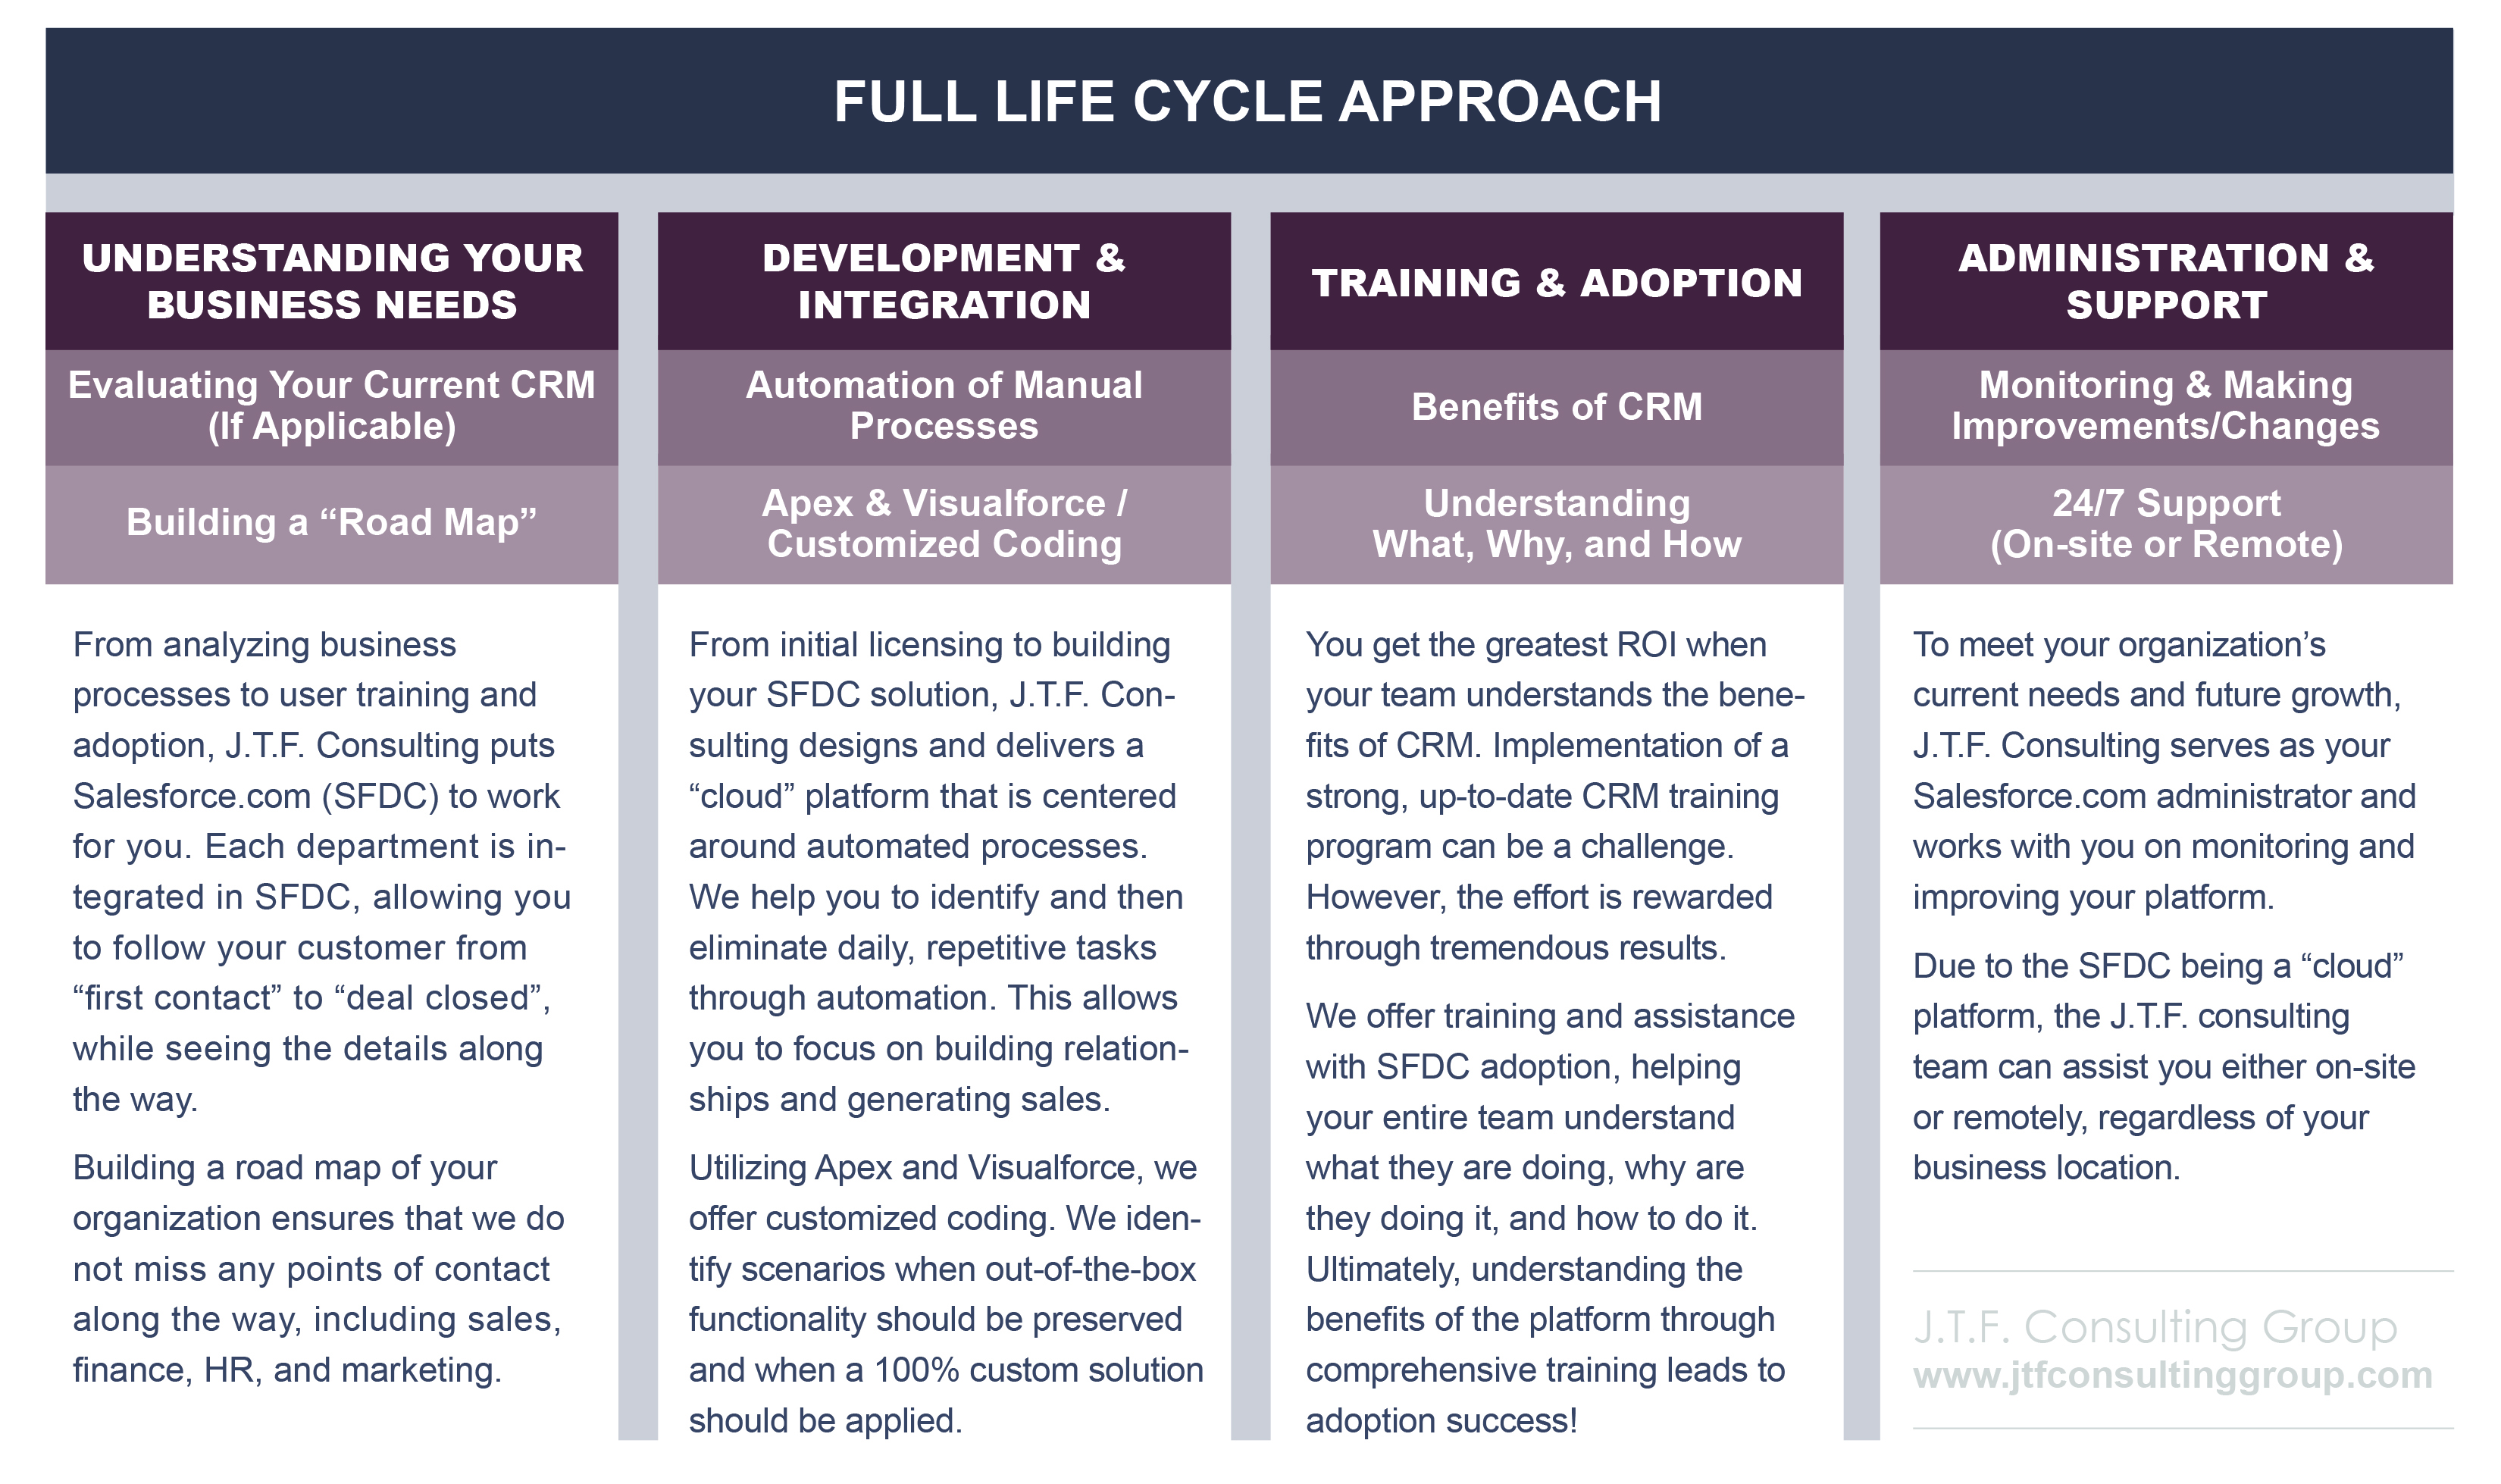 Salesforce_LifeCycleApproach